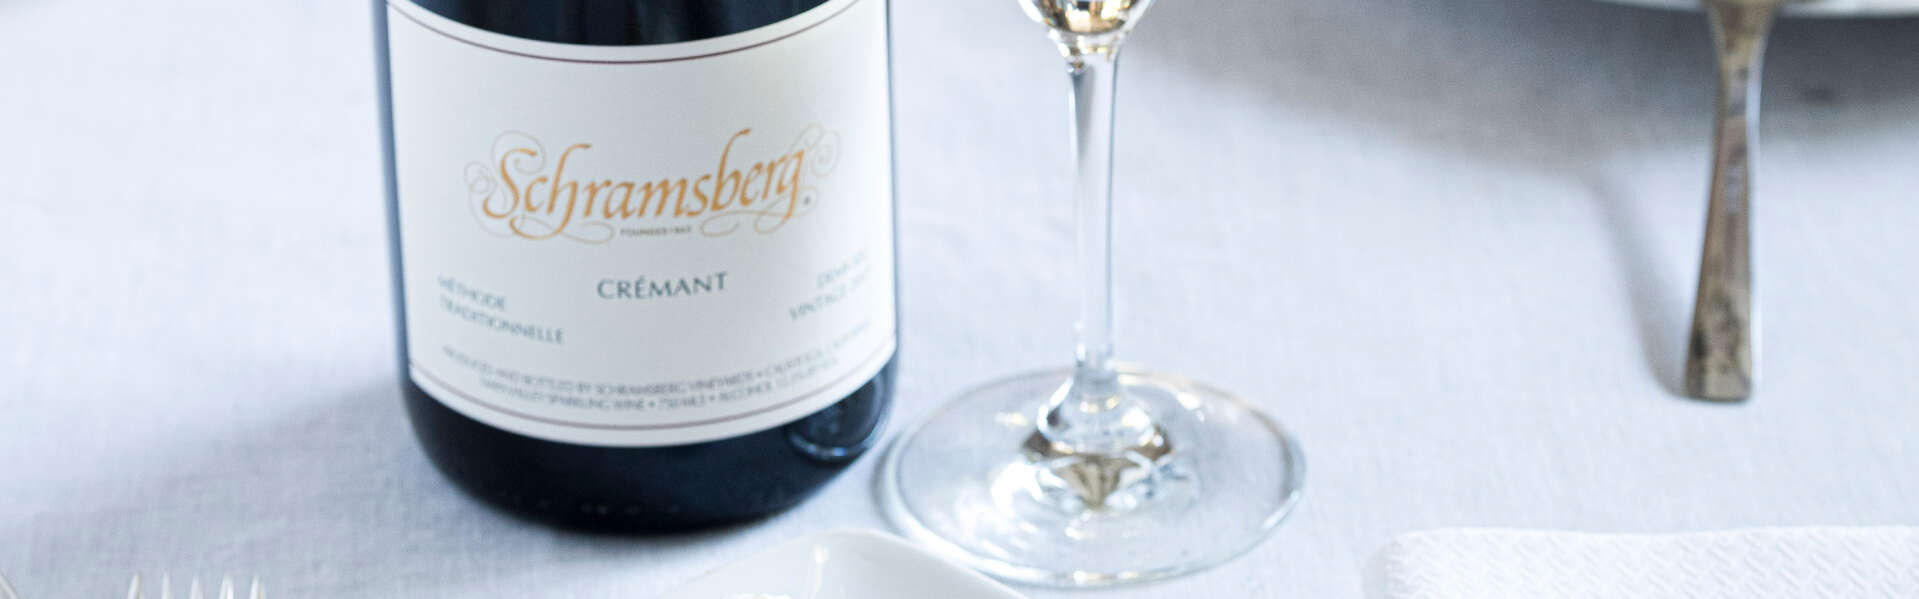 Schramsberg Crémant Demi-Sec paired with Calistoga Apple Torte